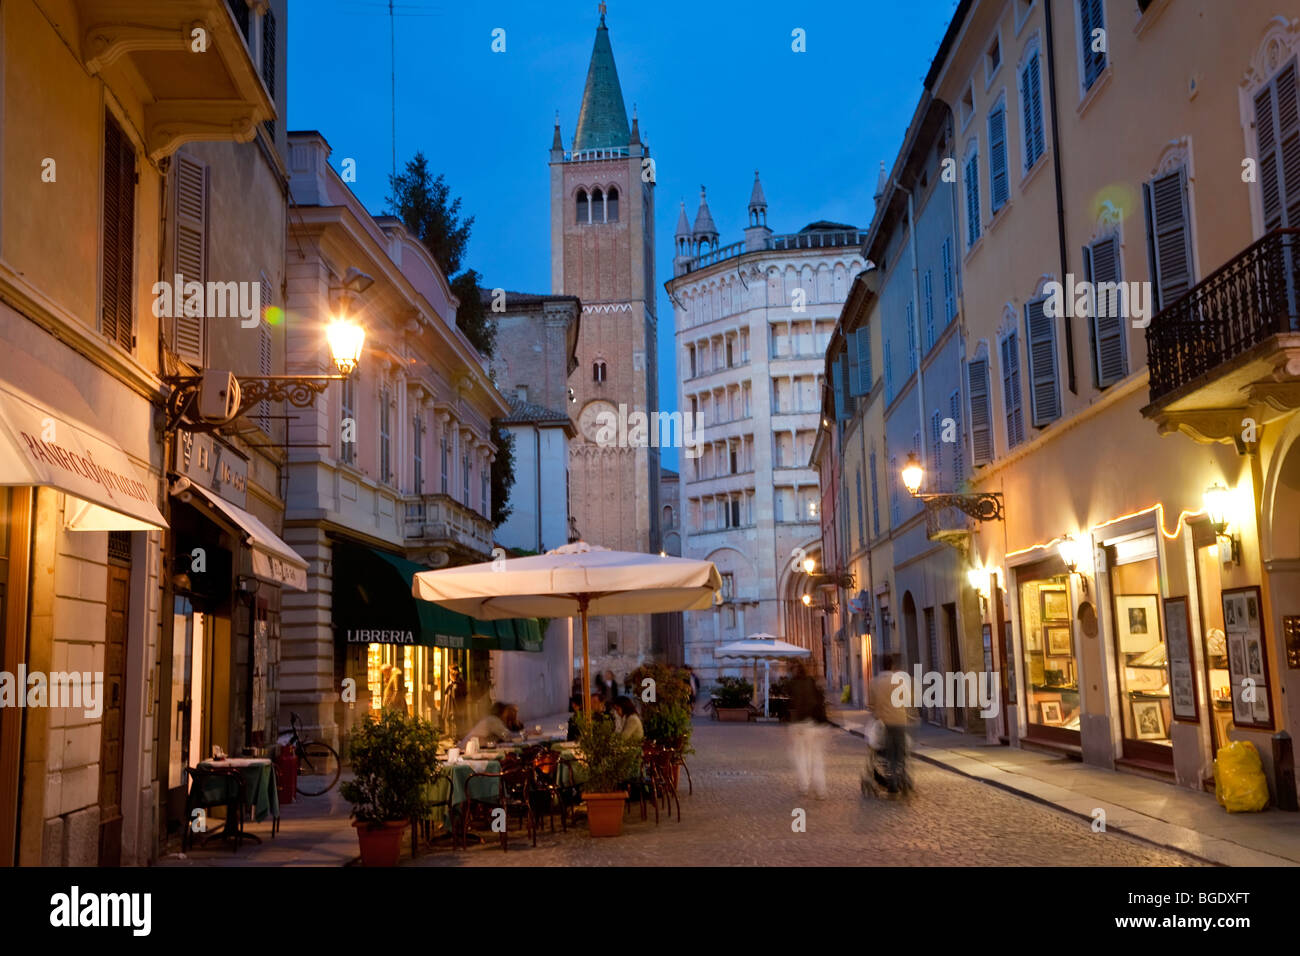 Campanille bell tower of Dumo (cathedral) & Baptistry on right, Parma, Emilia Romagna, Italy Stock Photo